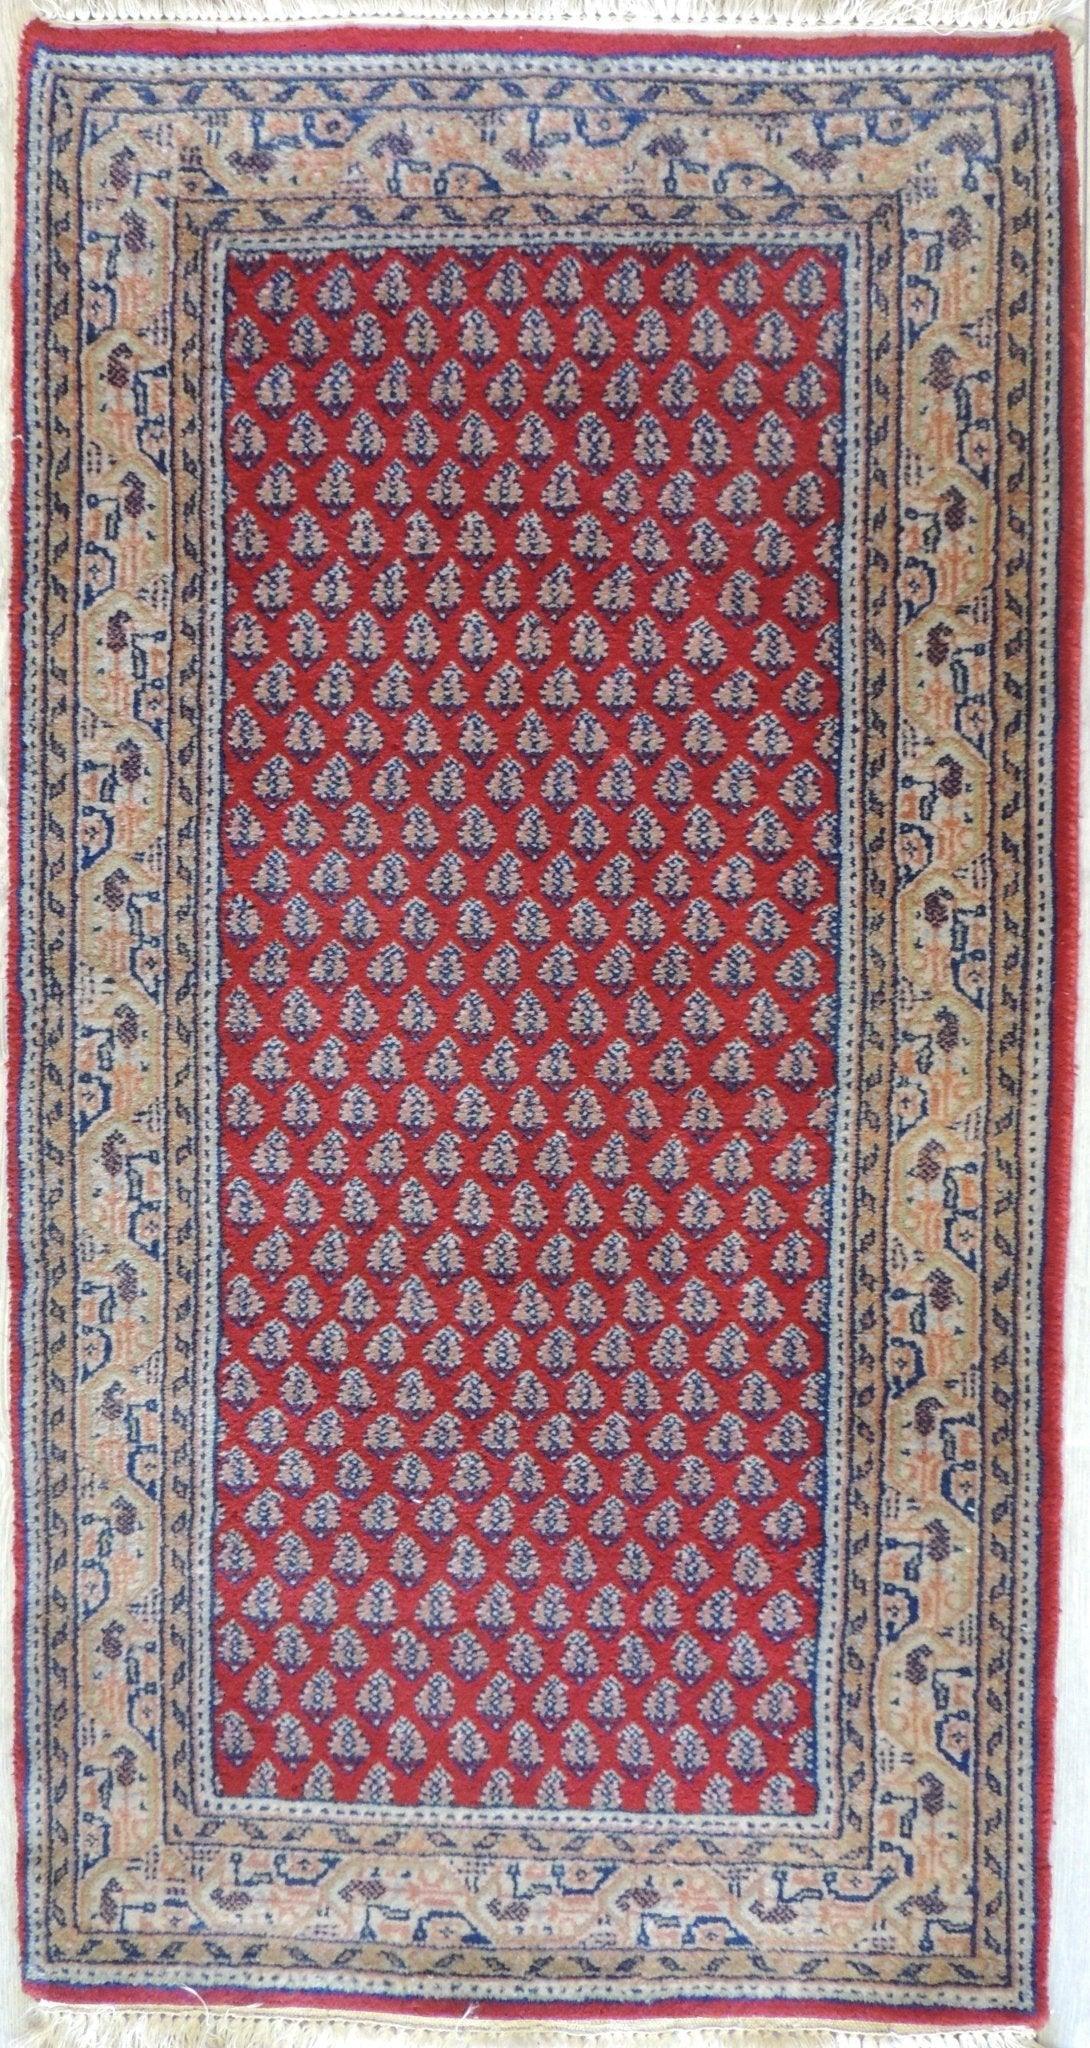 Exquisite Vintage Hand-Knotted Indo-MIR Rug 30''x54''